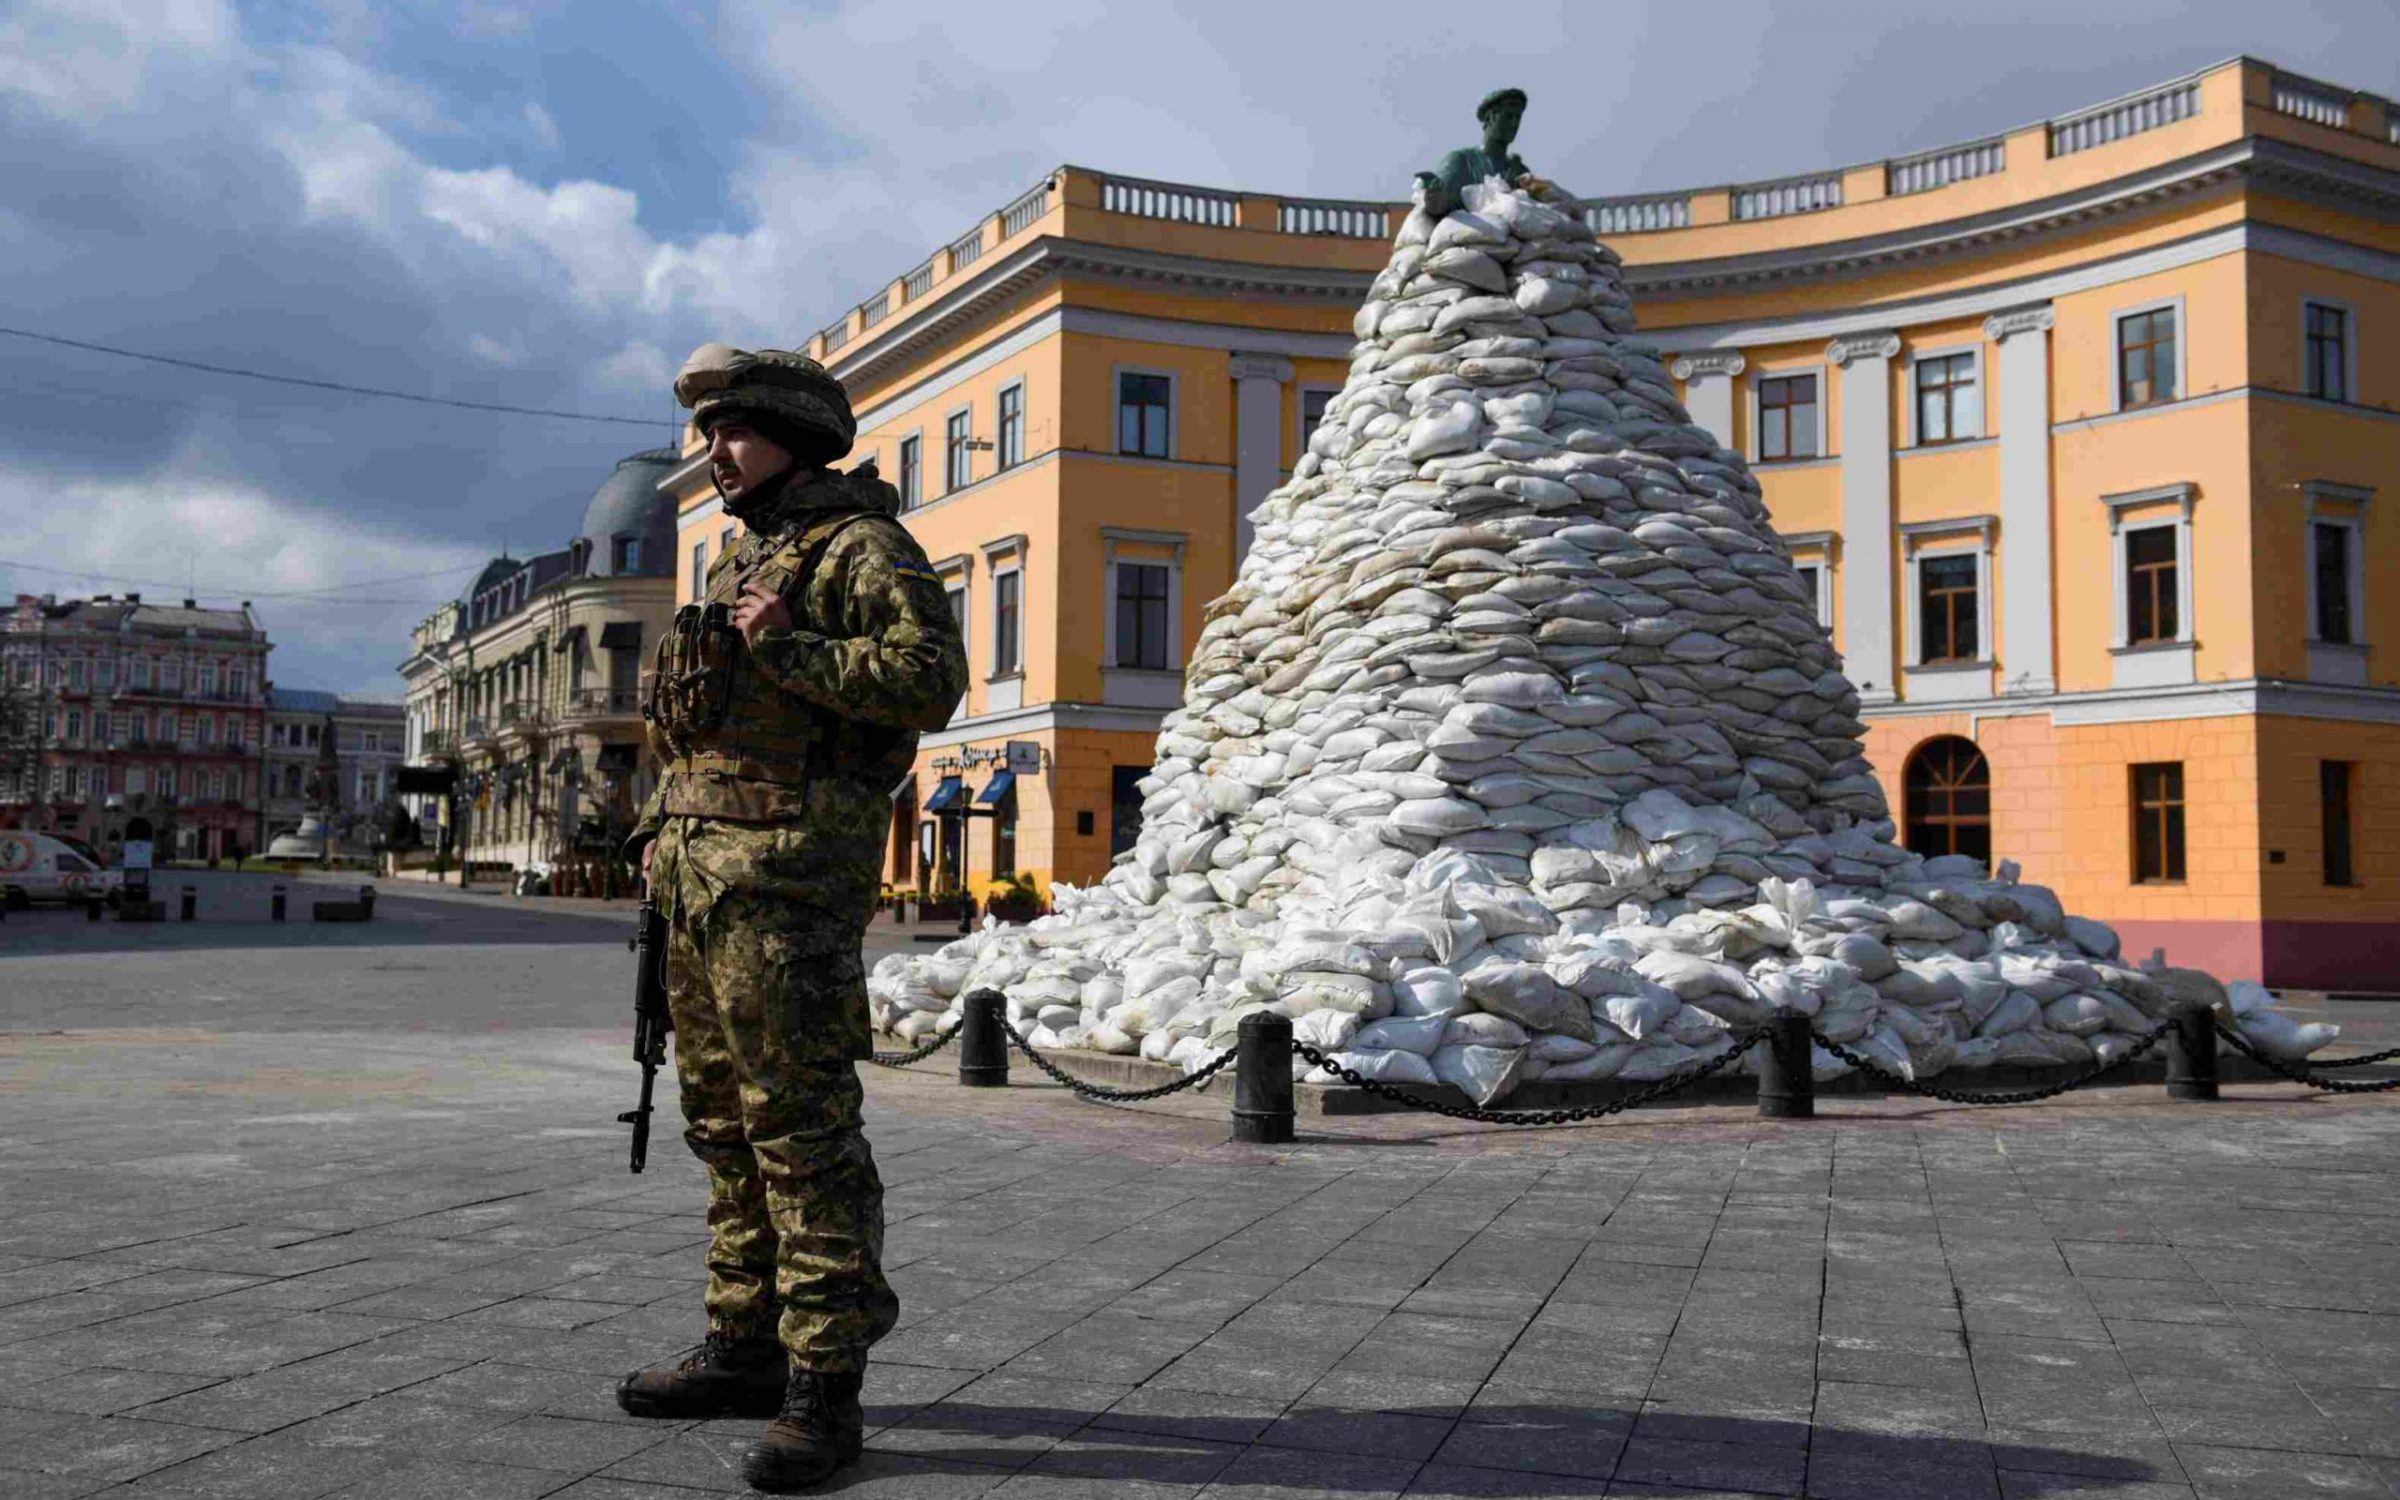 A Ukrainian soldier stands guard next to a monument of the city founder Duke de Richelieu, covered with sand bags for protection, amid Russia's invasion of Ukraine, in Odessa, Ukraine, March 10, 2022. REUTERS/Alexandros Avramidis